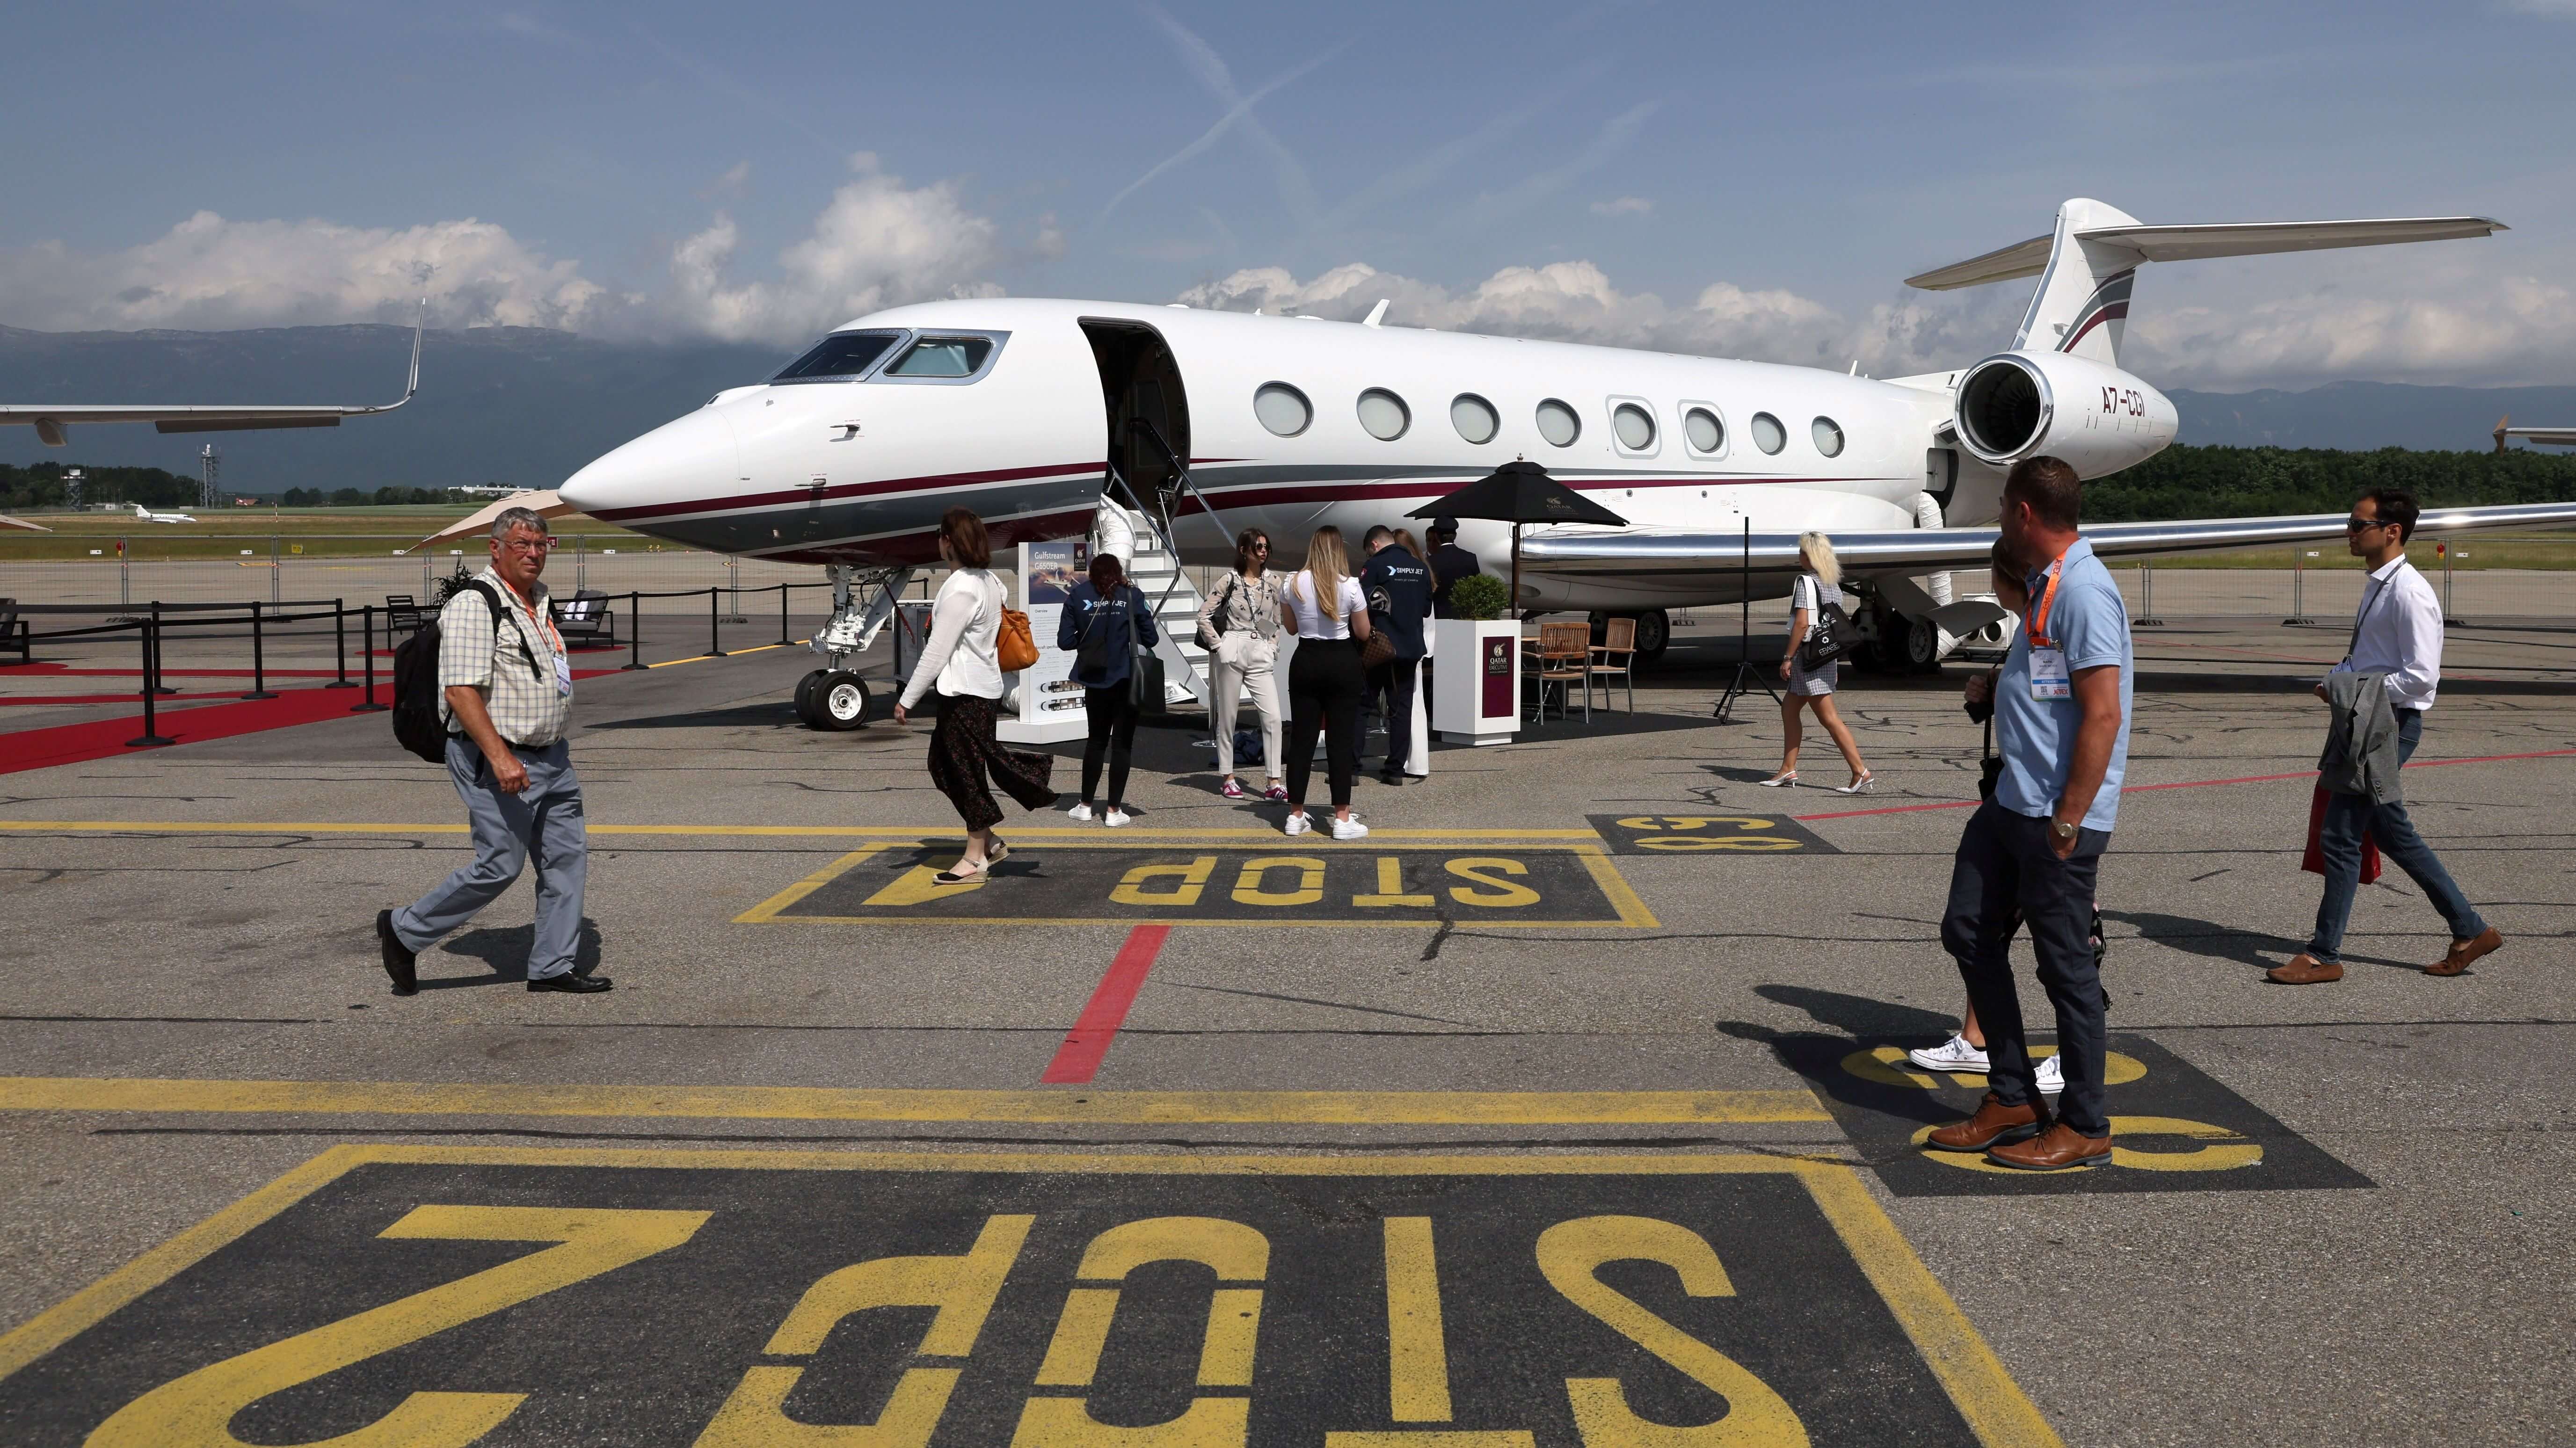 Europe's Business Jet Industry Aims For Green Rebrand